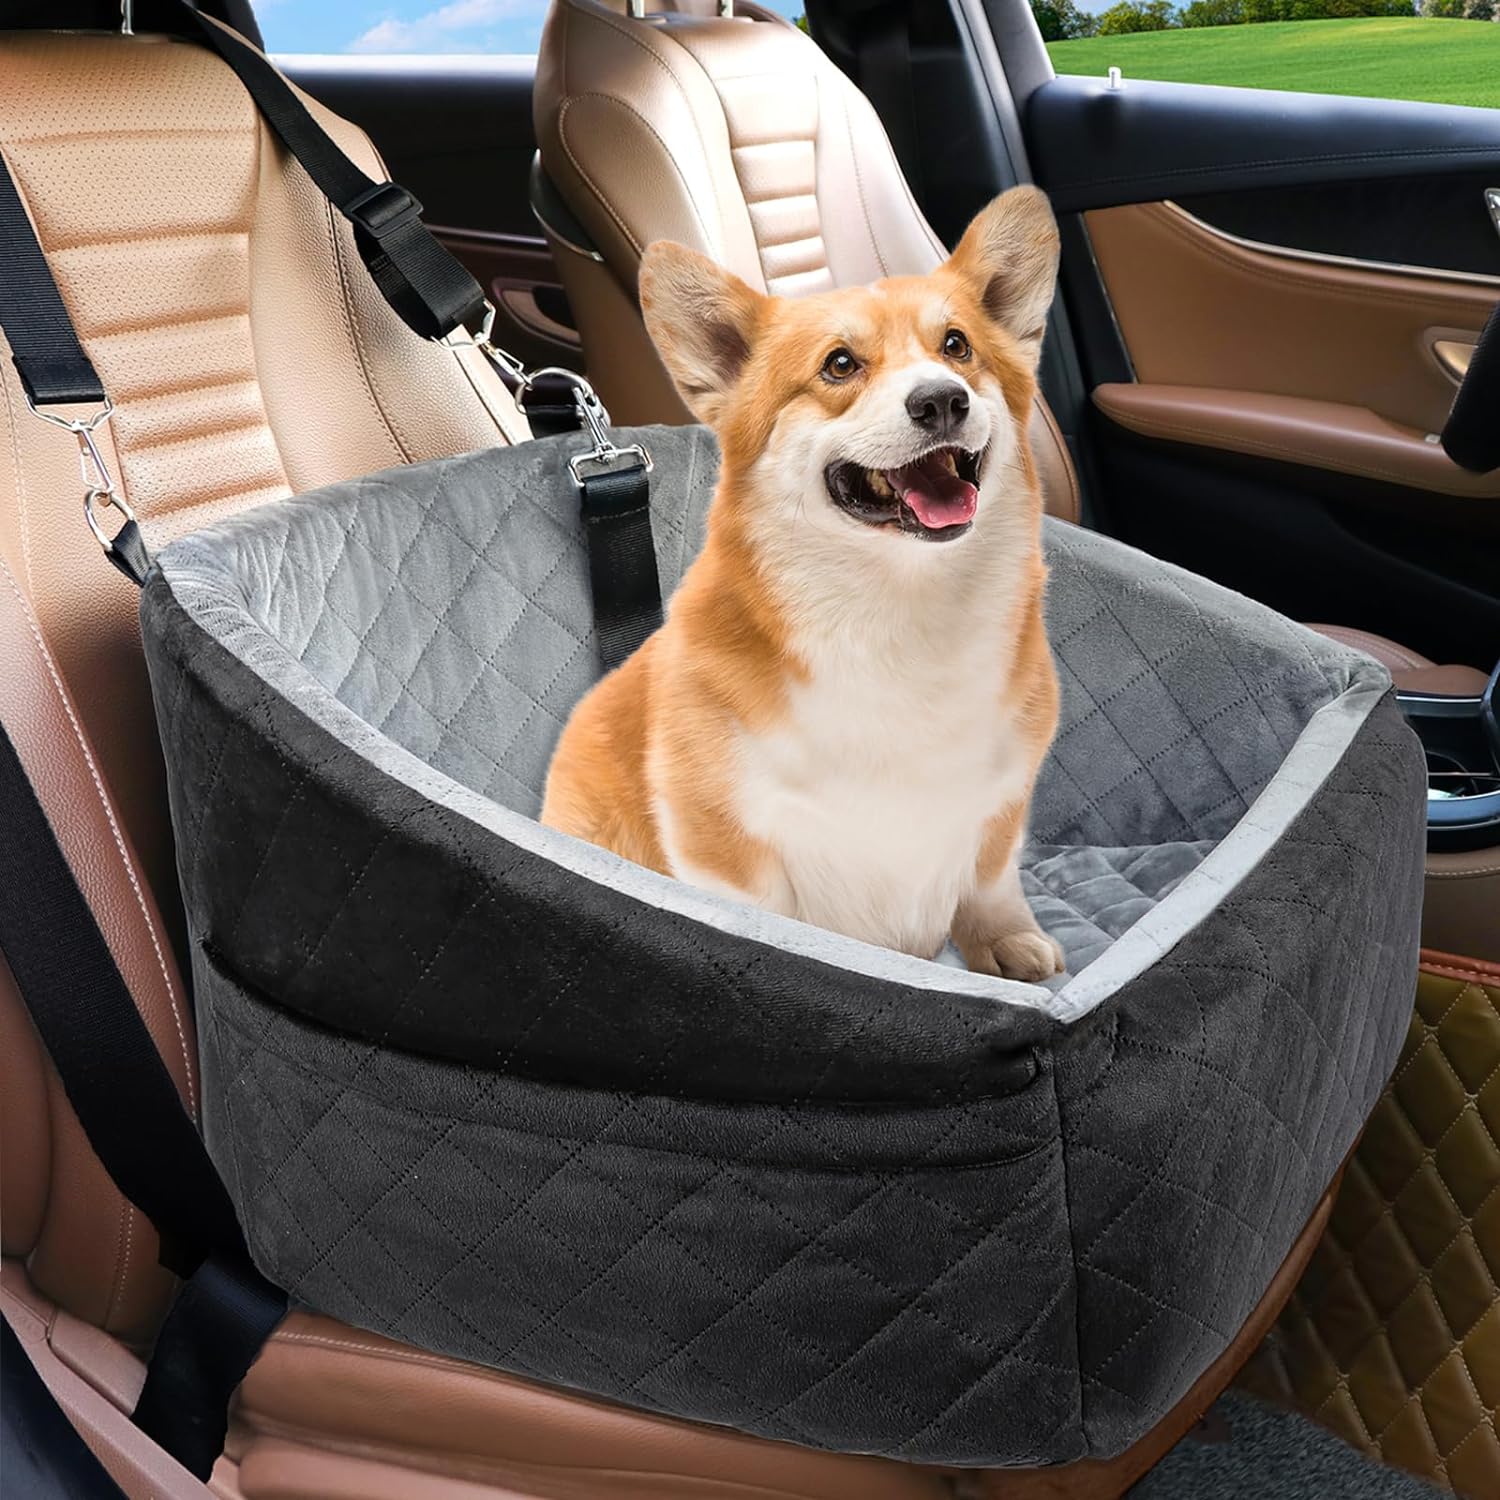 Dog Car Seat for Small Dogs Detachable Washable Dog Booster Seat for Medium Dogs Under 35lbs, Pet Car Seat Travel Bed with Storage Pockets and Dog Safety Belt